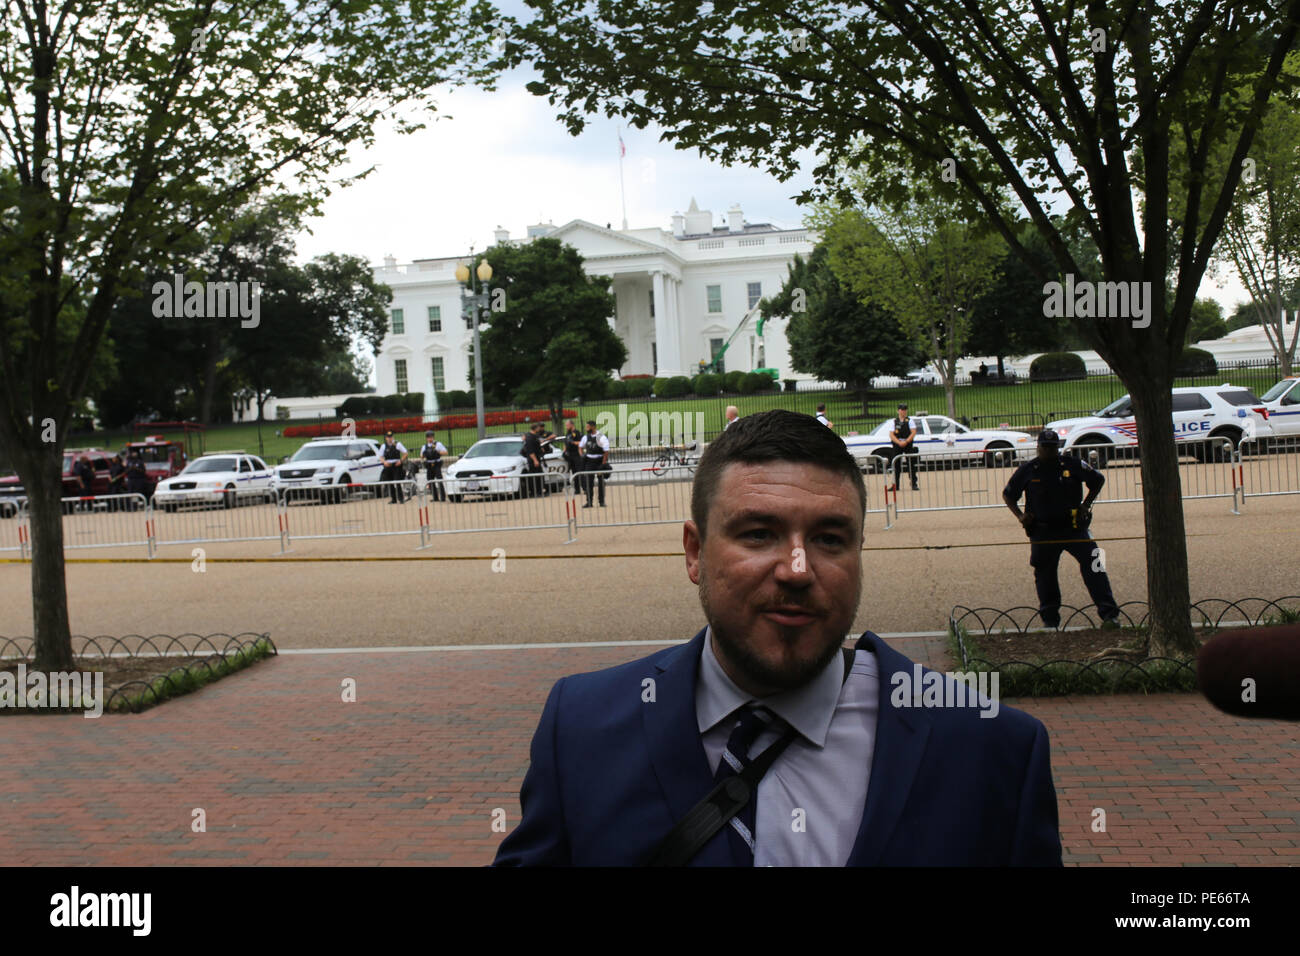 Washington, DC, USA. 12 Aug 2018. Jason Kessler, leader of the Unite the Right protest, gives an interview in front of the White House. Credit: Joseph Gruber/Alamy Live News Stock Photo